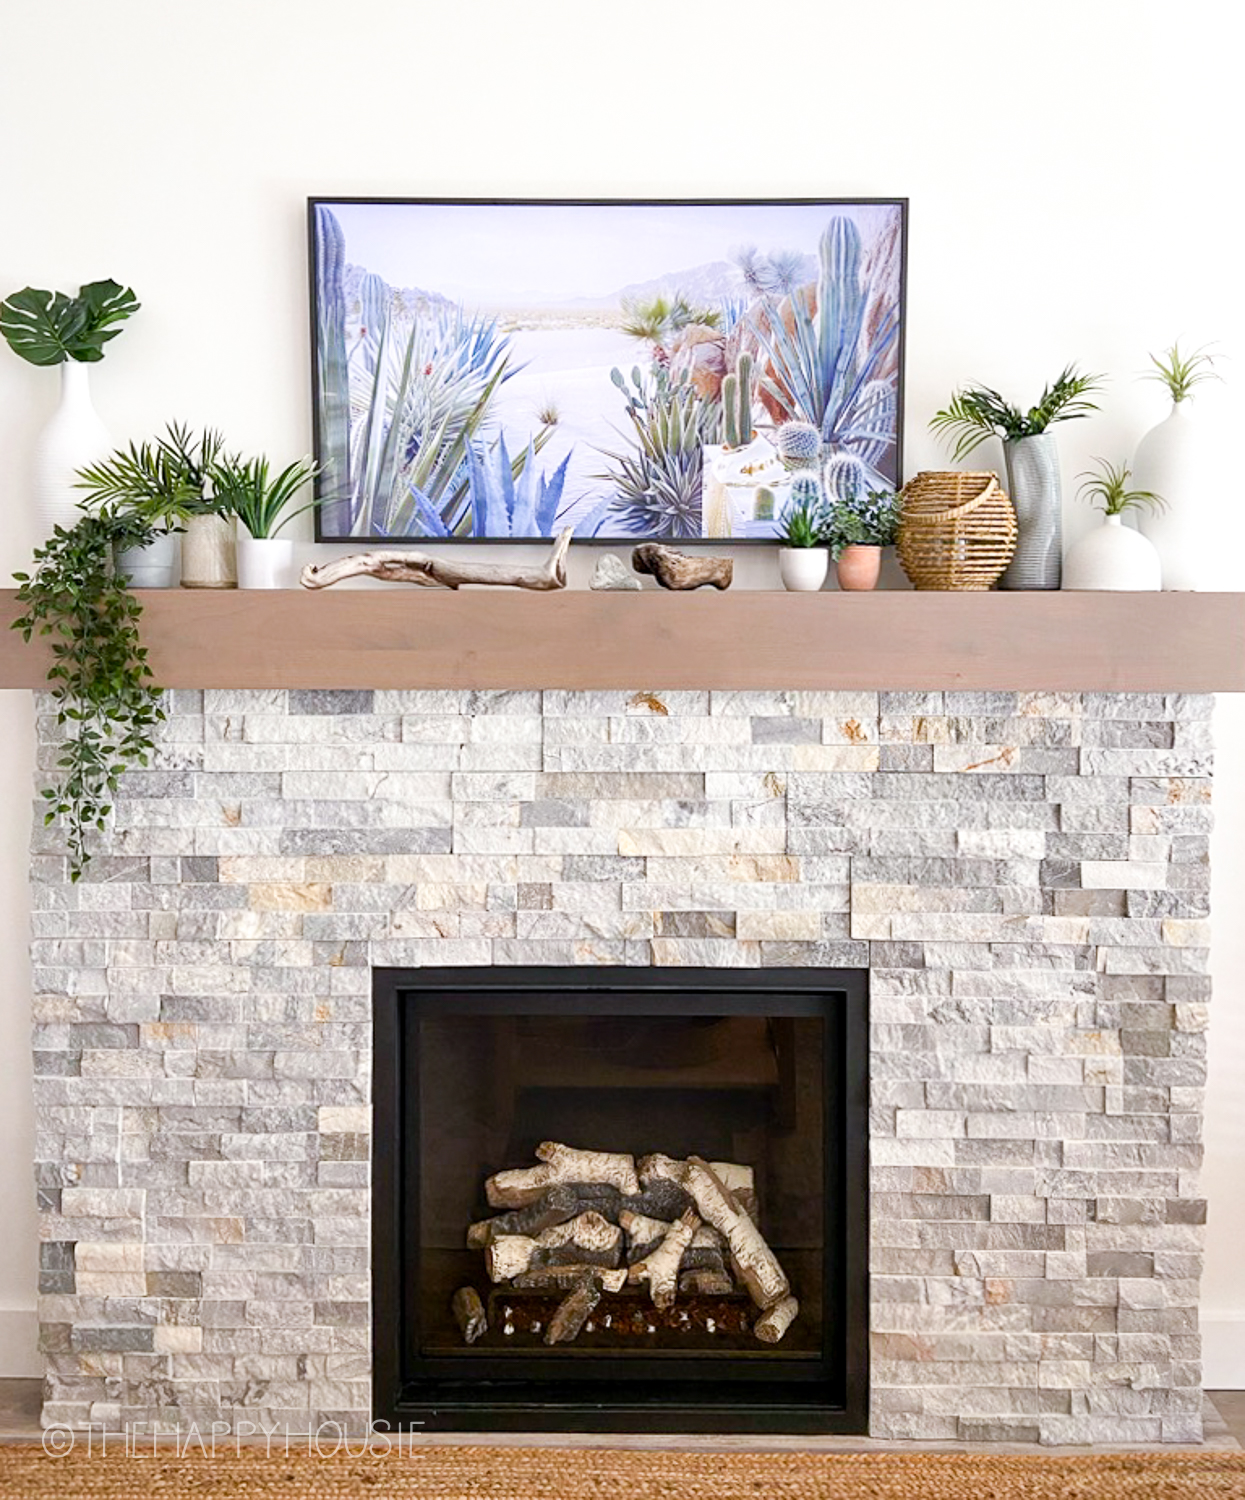 A stone fireplace with a Frame TV on the mantel.